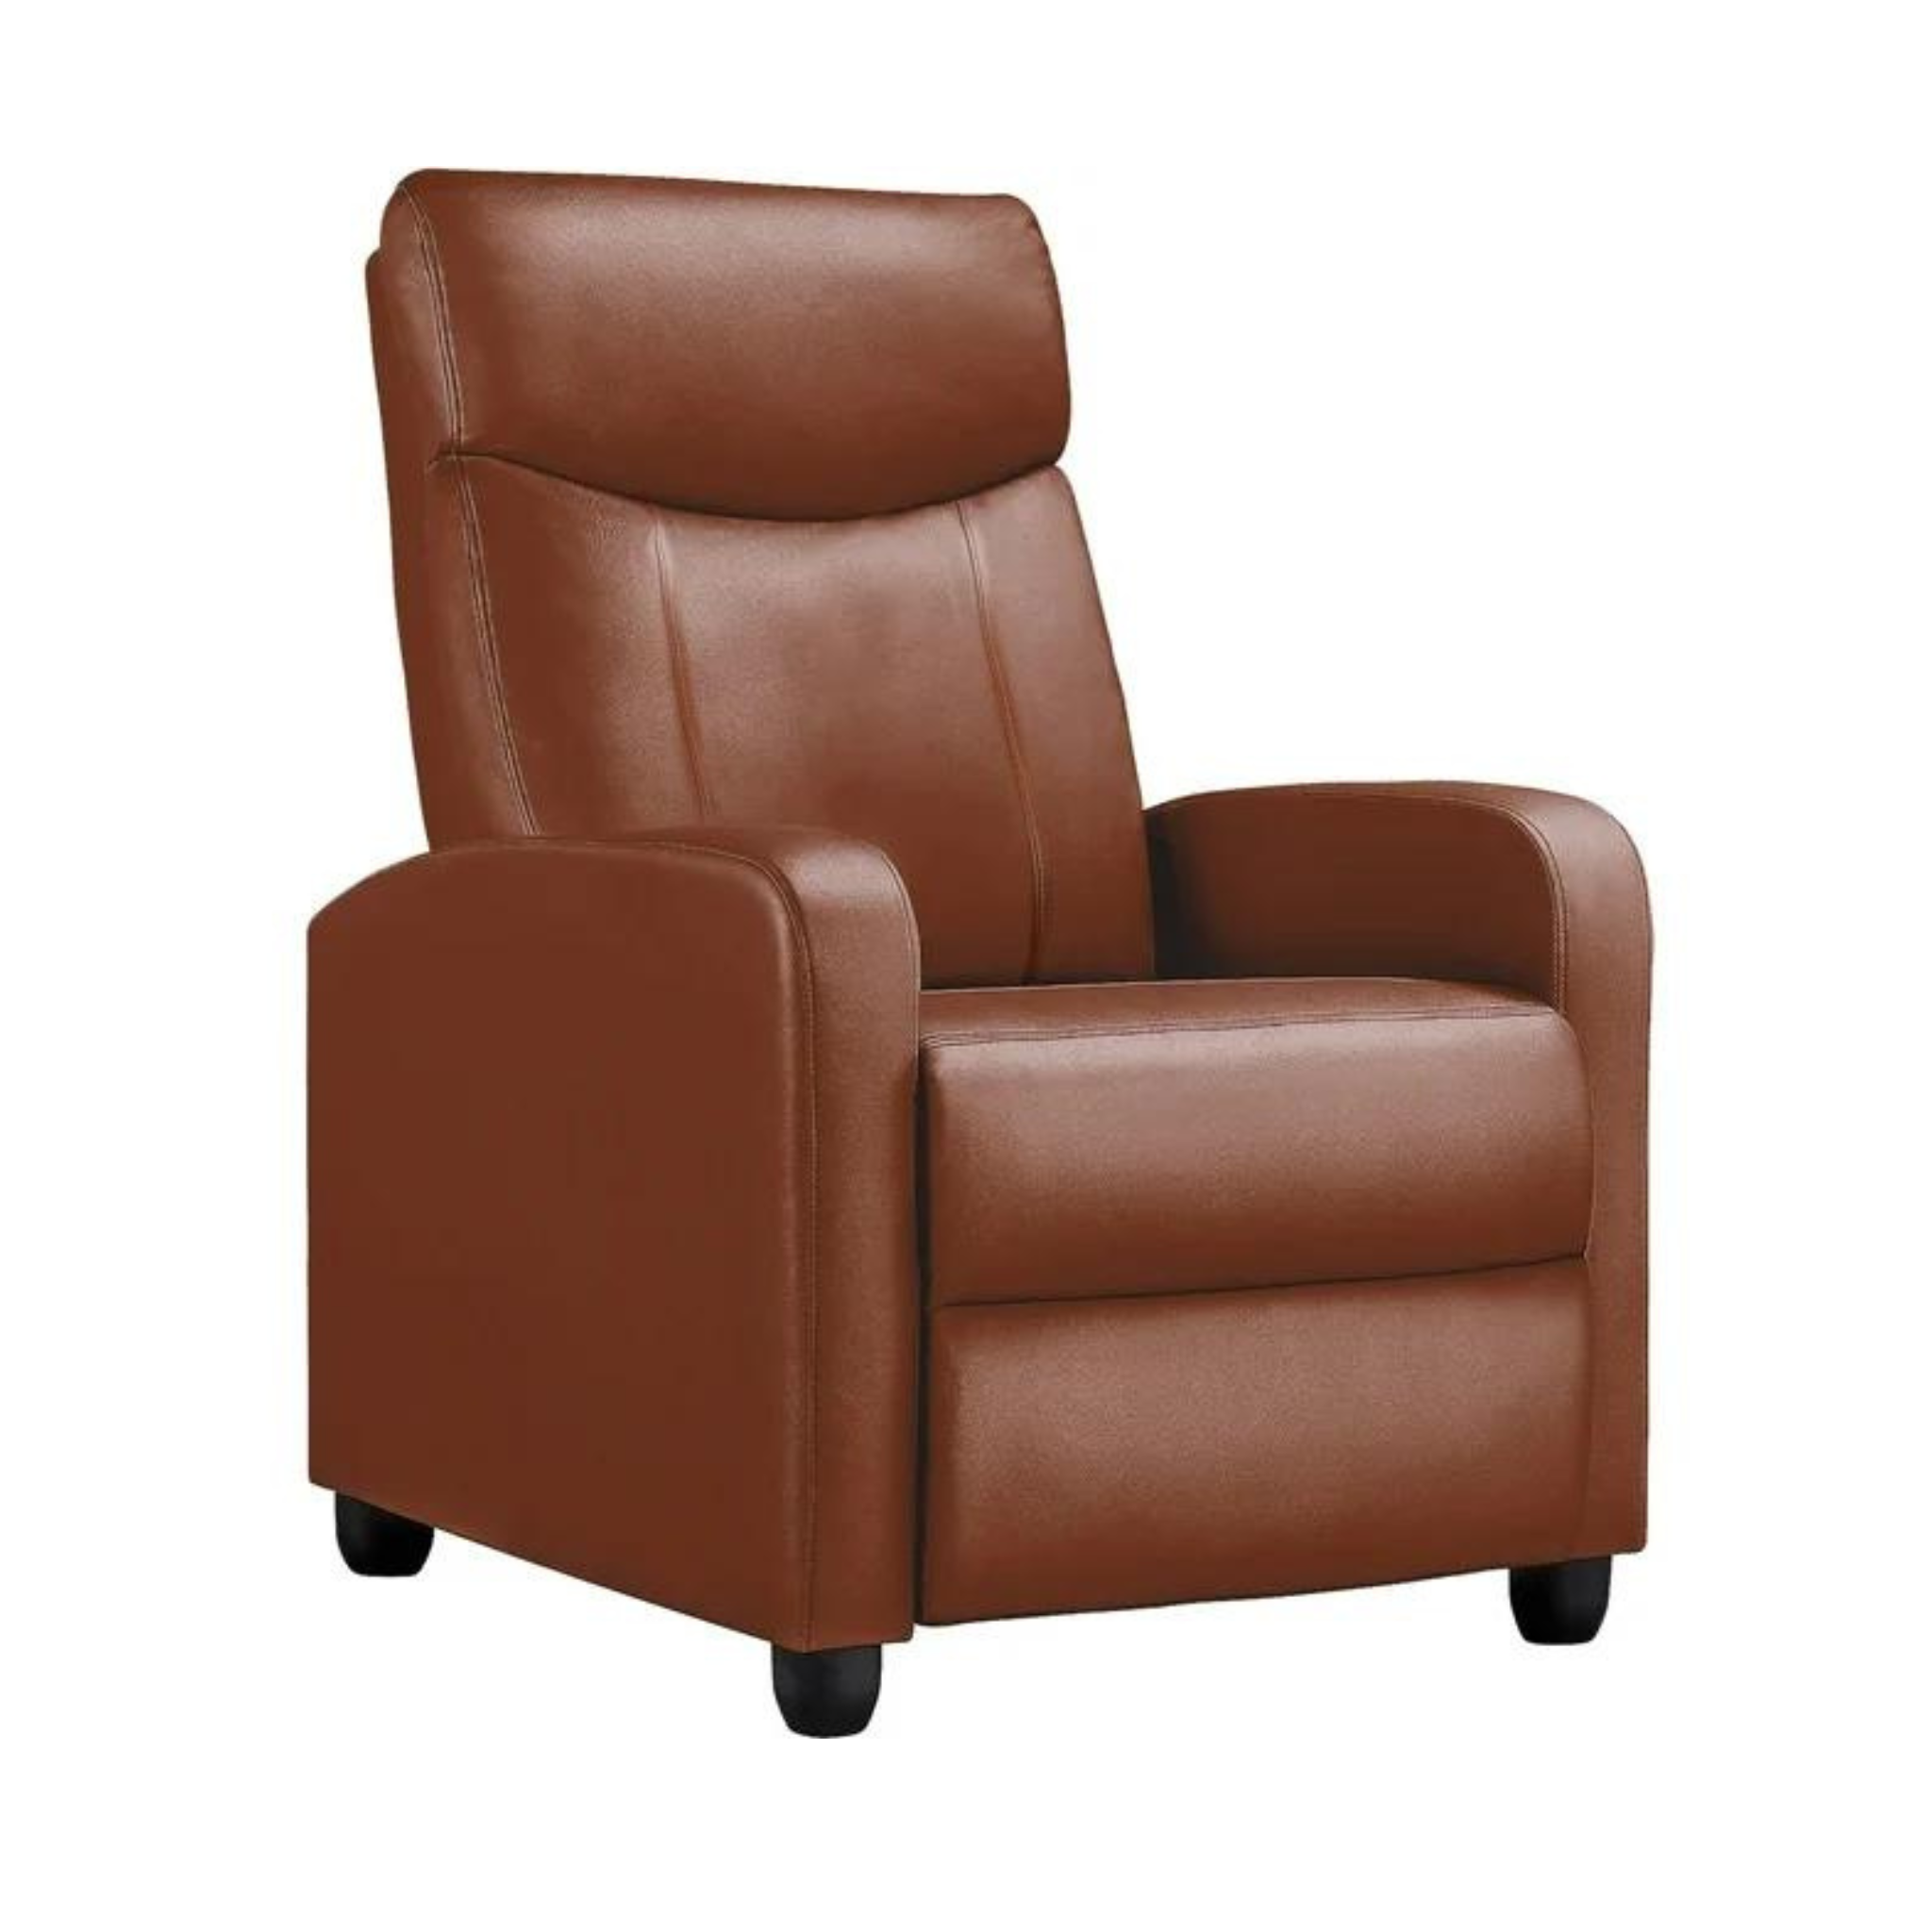 Comhoma Push Back Theater Adjustable Recliner with Footrest